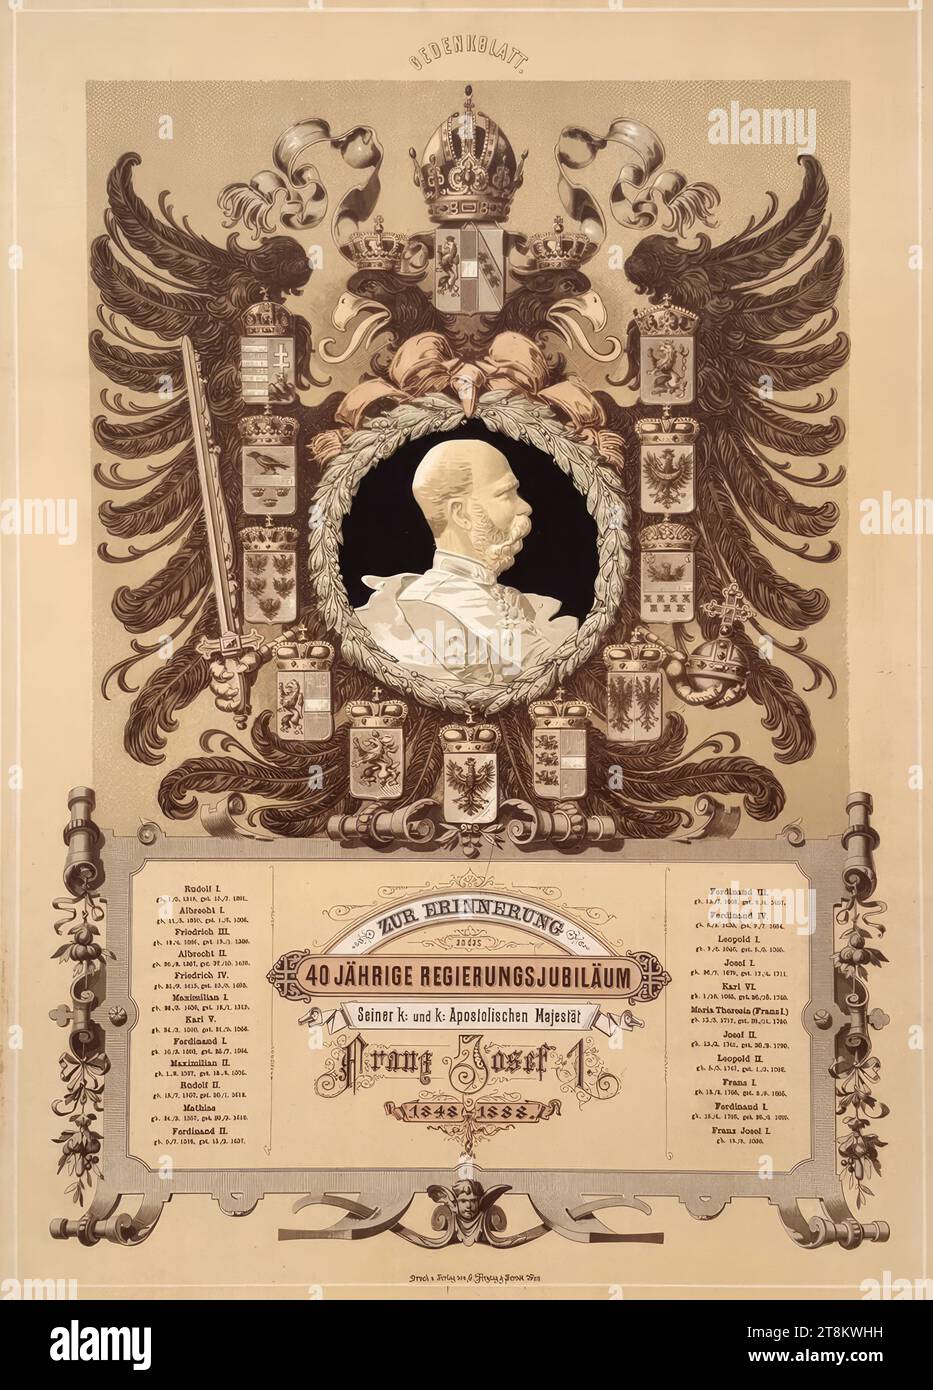 MEMORIAL SHEET., TO REMINDER, to the, 40 YEARS OF GOVERNMENT ANNIVERSARY, His k: and k: Apostolic Majesty, Franz Josef 1., 1848-1888.', 1888, print, color lithograph with portrait medallion in blind embossing, on paper, sheet: 54.4 × 38 cm Stock Photo